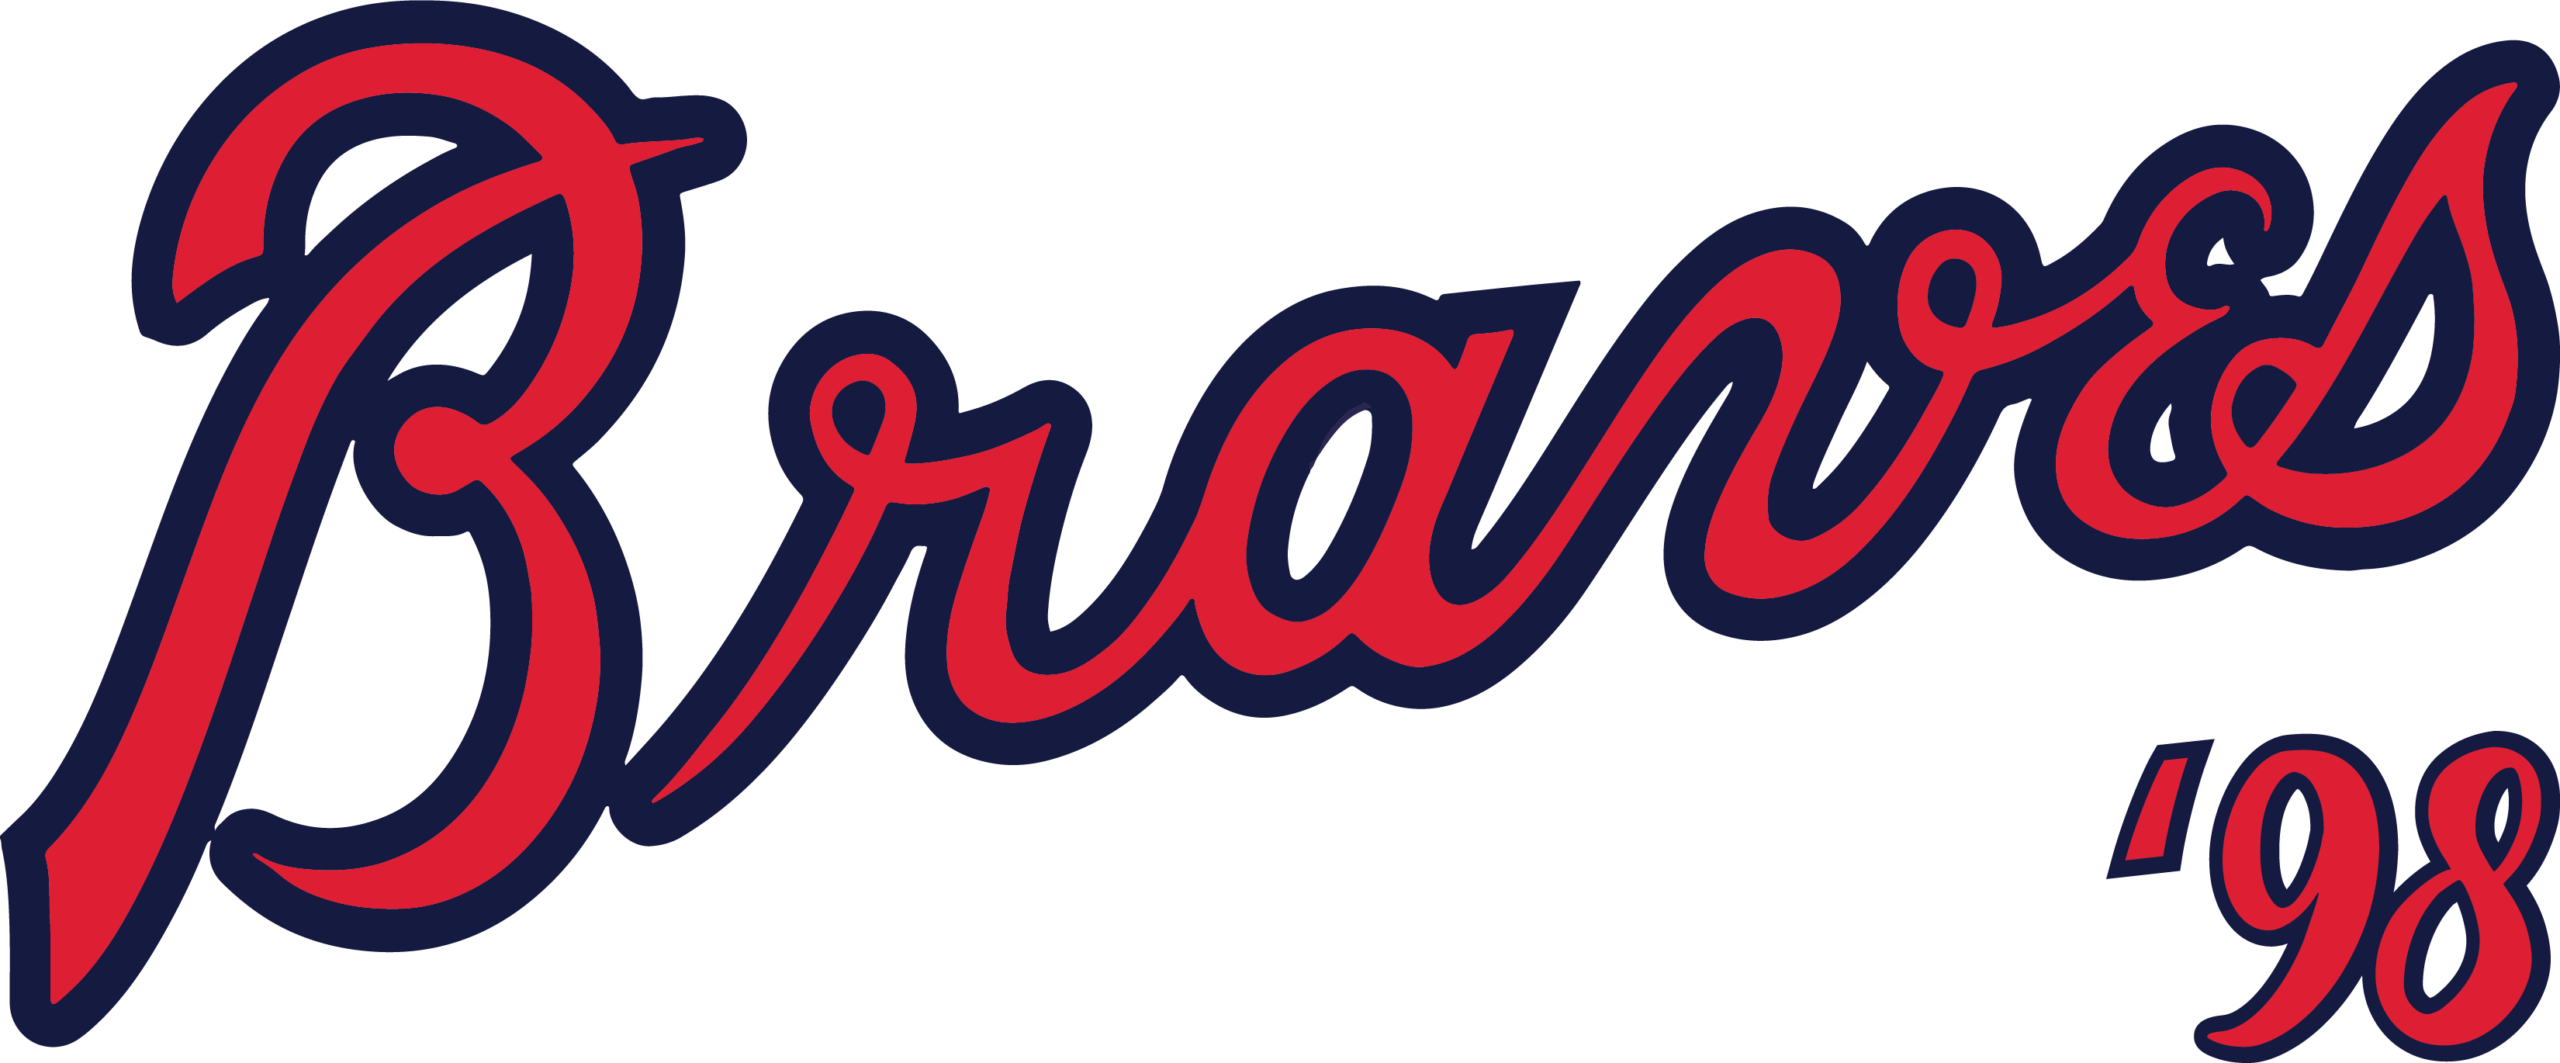 Limited Release - '98 Braves Tee/ Youth and Adult Sizes Youth S